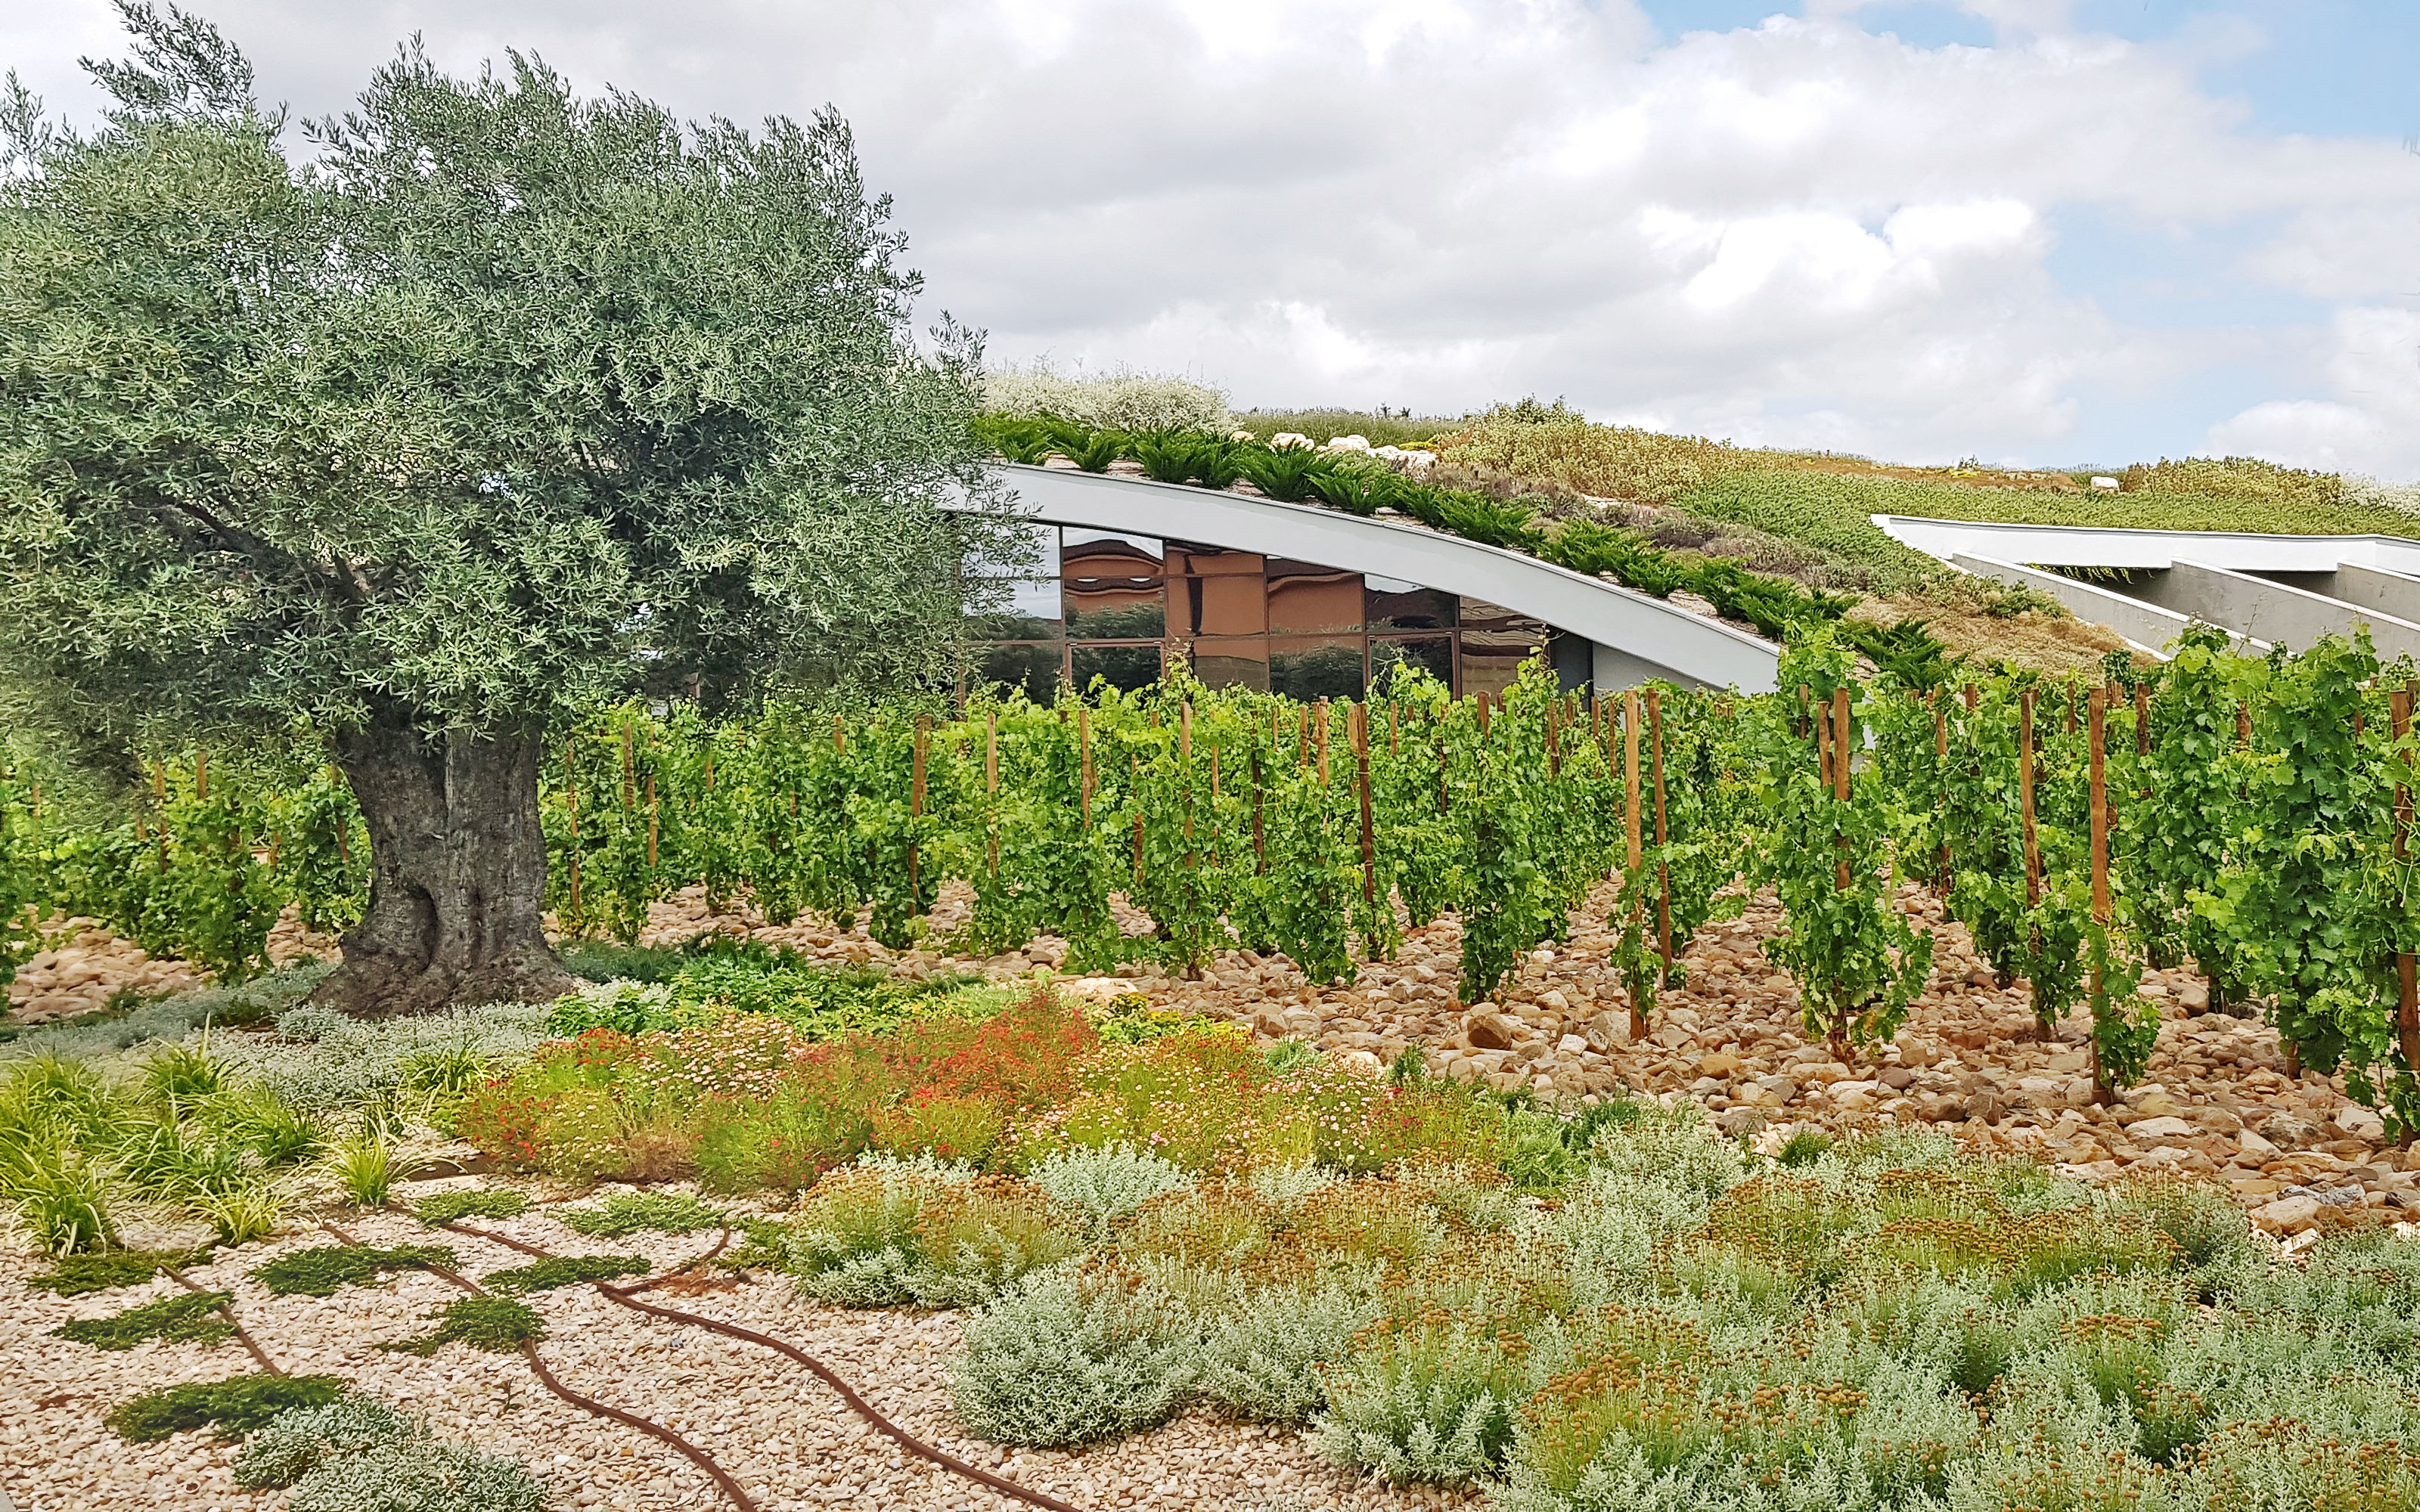 Vines in front of pitched green roof